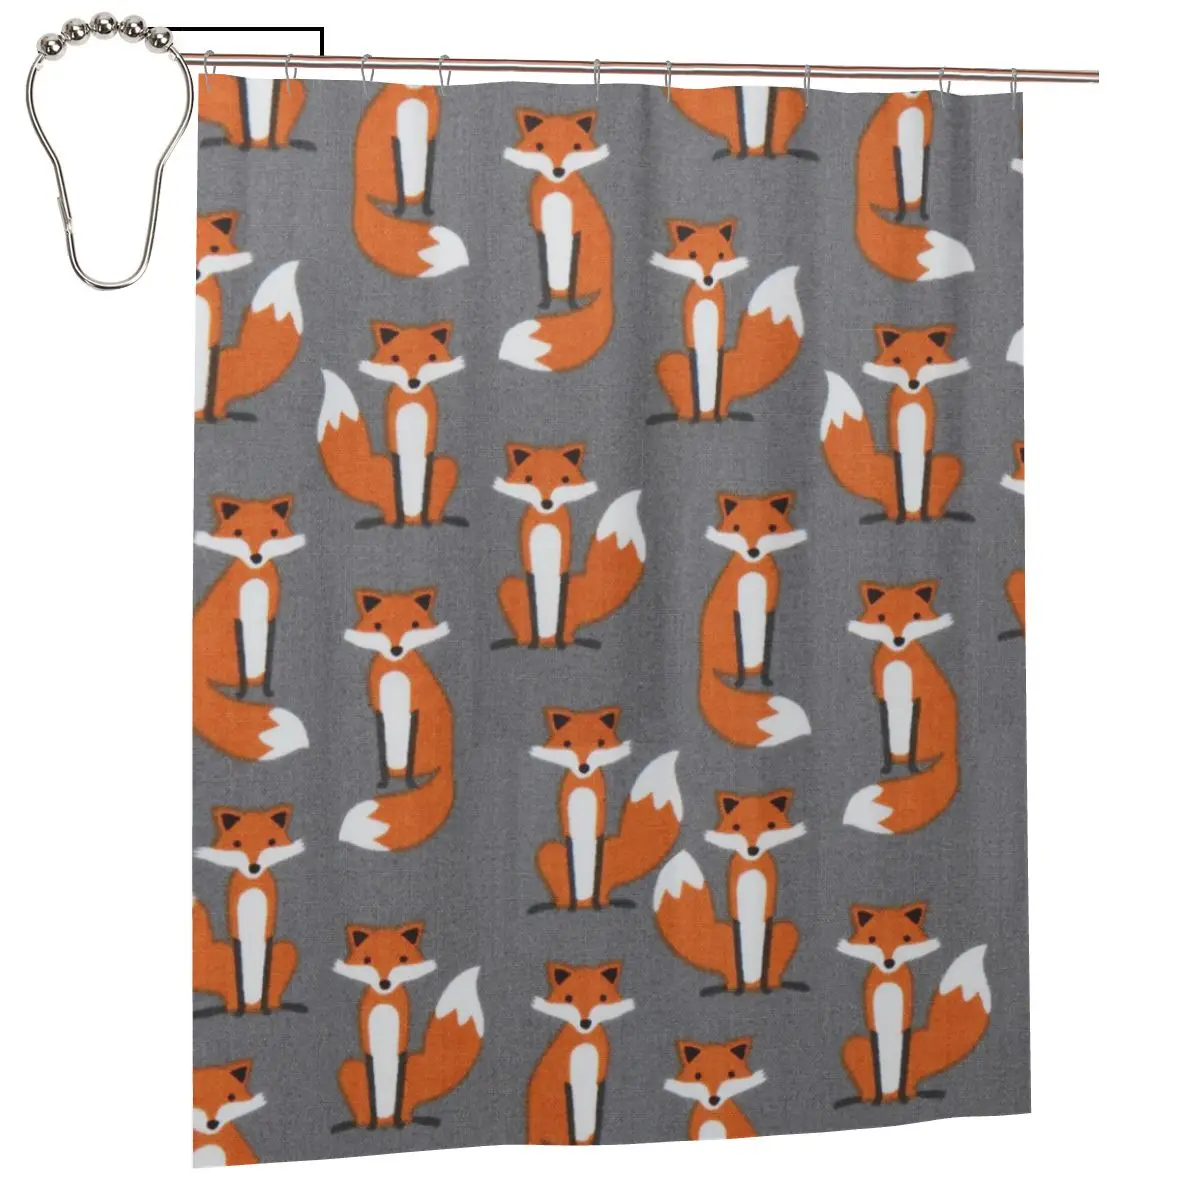 

Grey Fox Animal Shower Curtain for Bathroon Personalized Funny Bath Curtain Set with Iron Hooks Home Decor Gift 60x72in